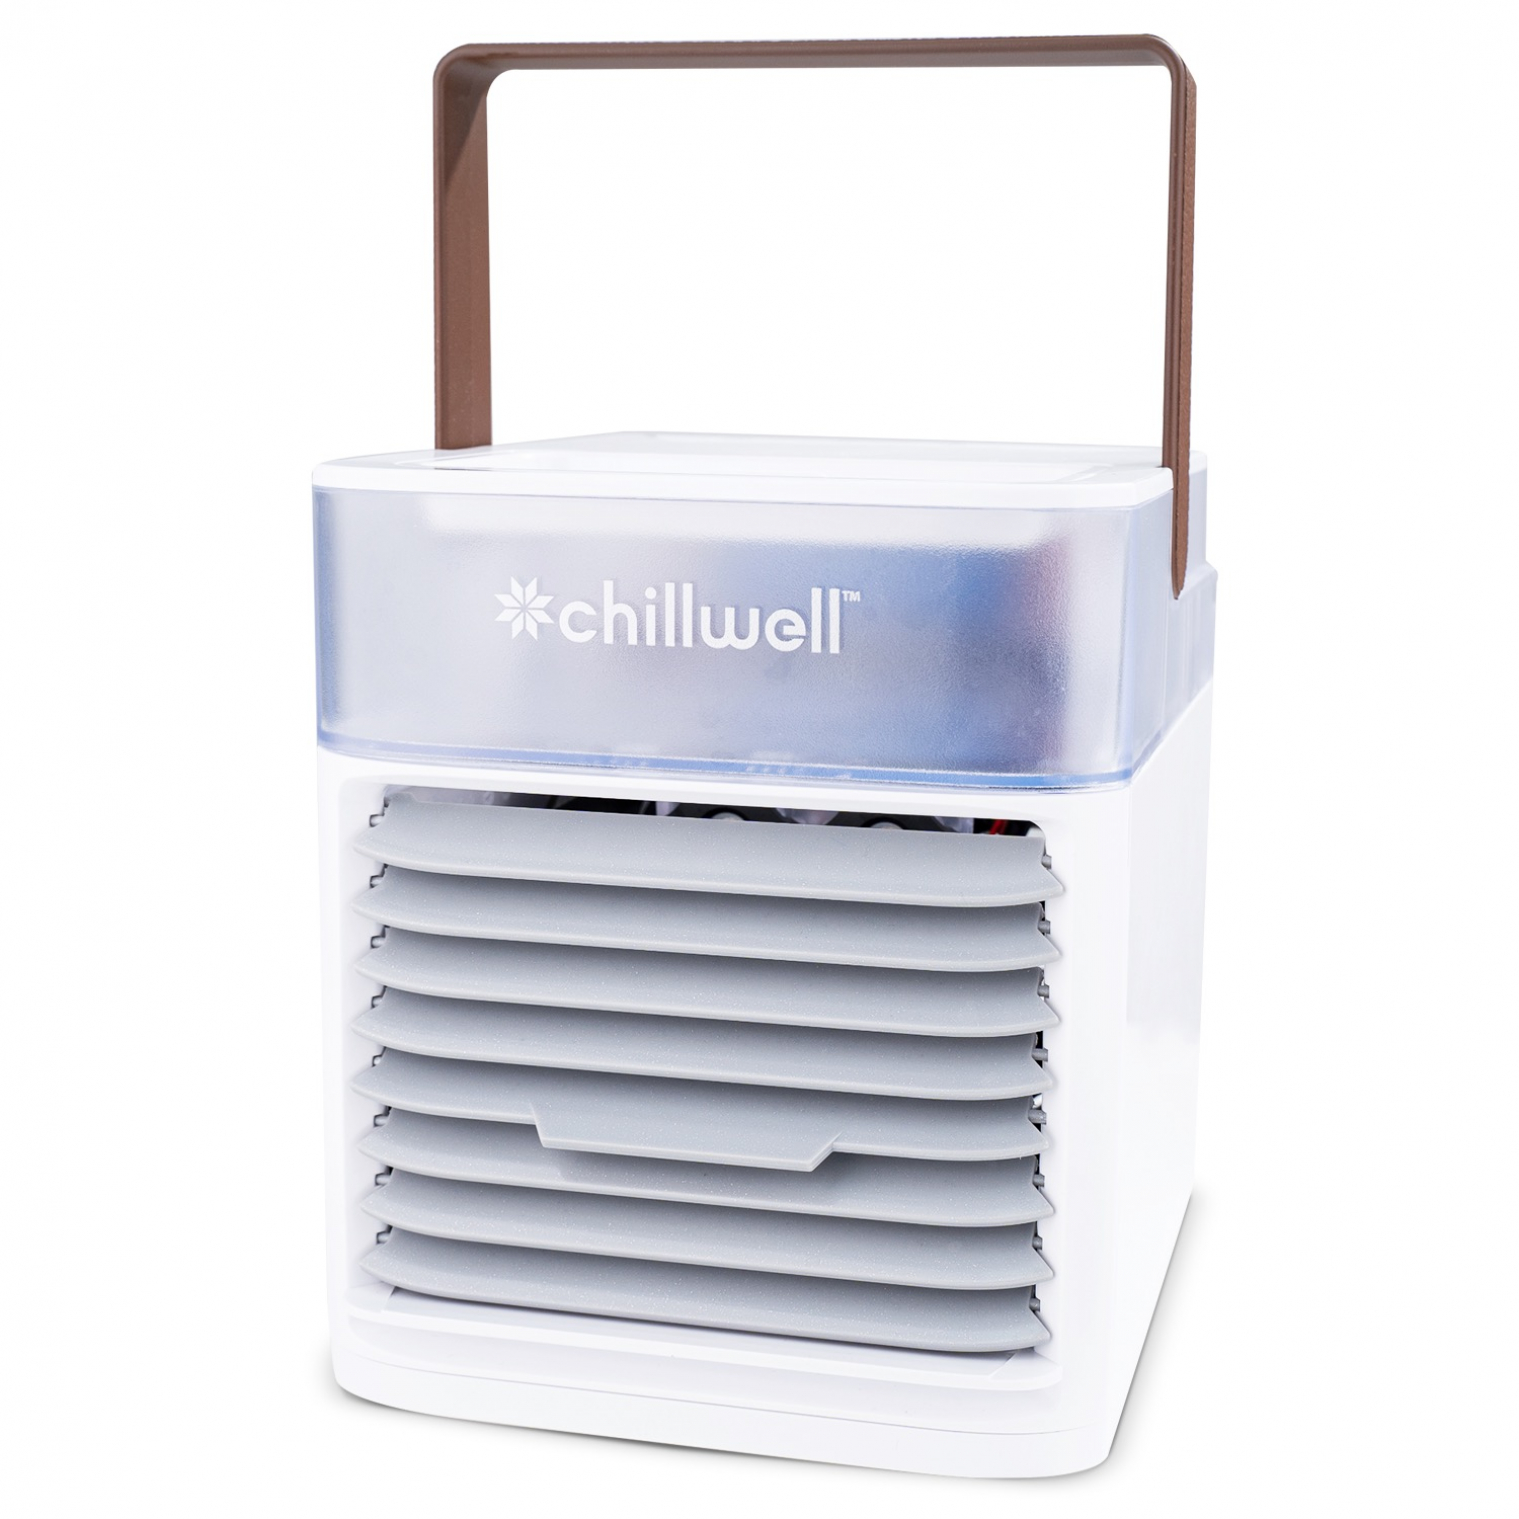 Who Sells Chillwell Ac Portable Ac